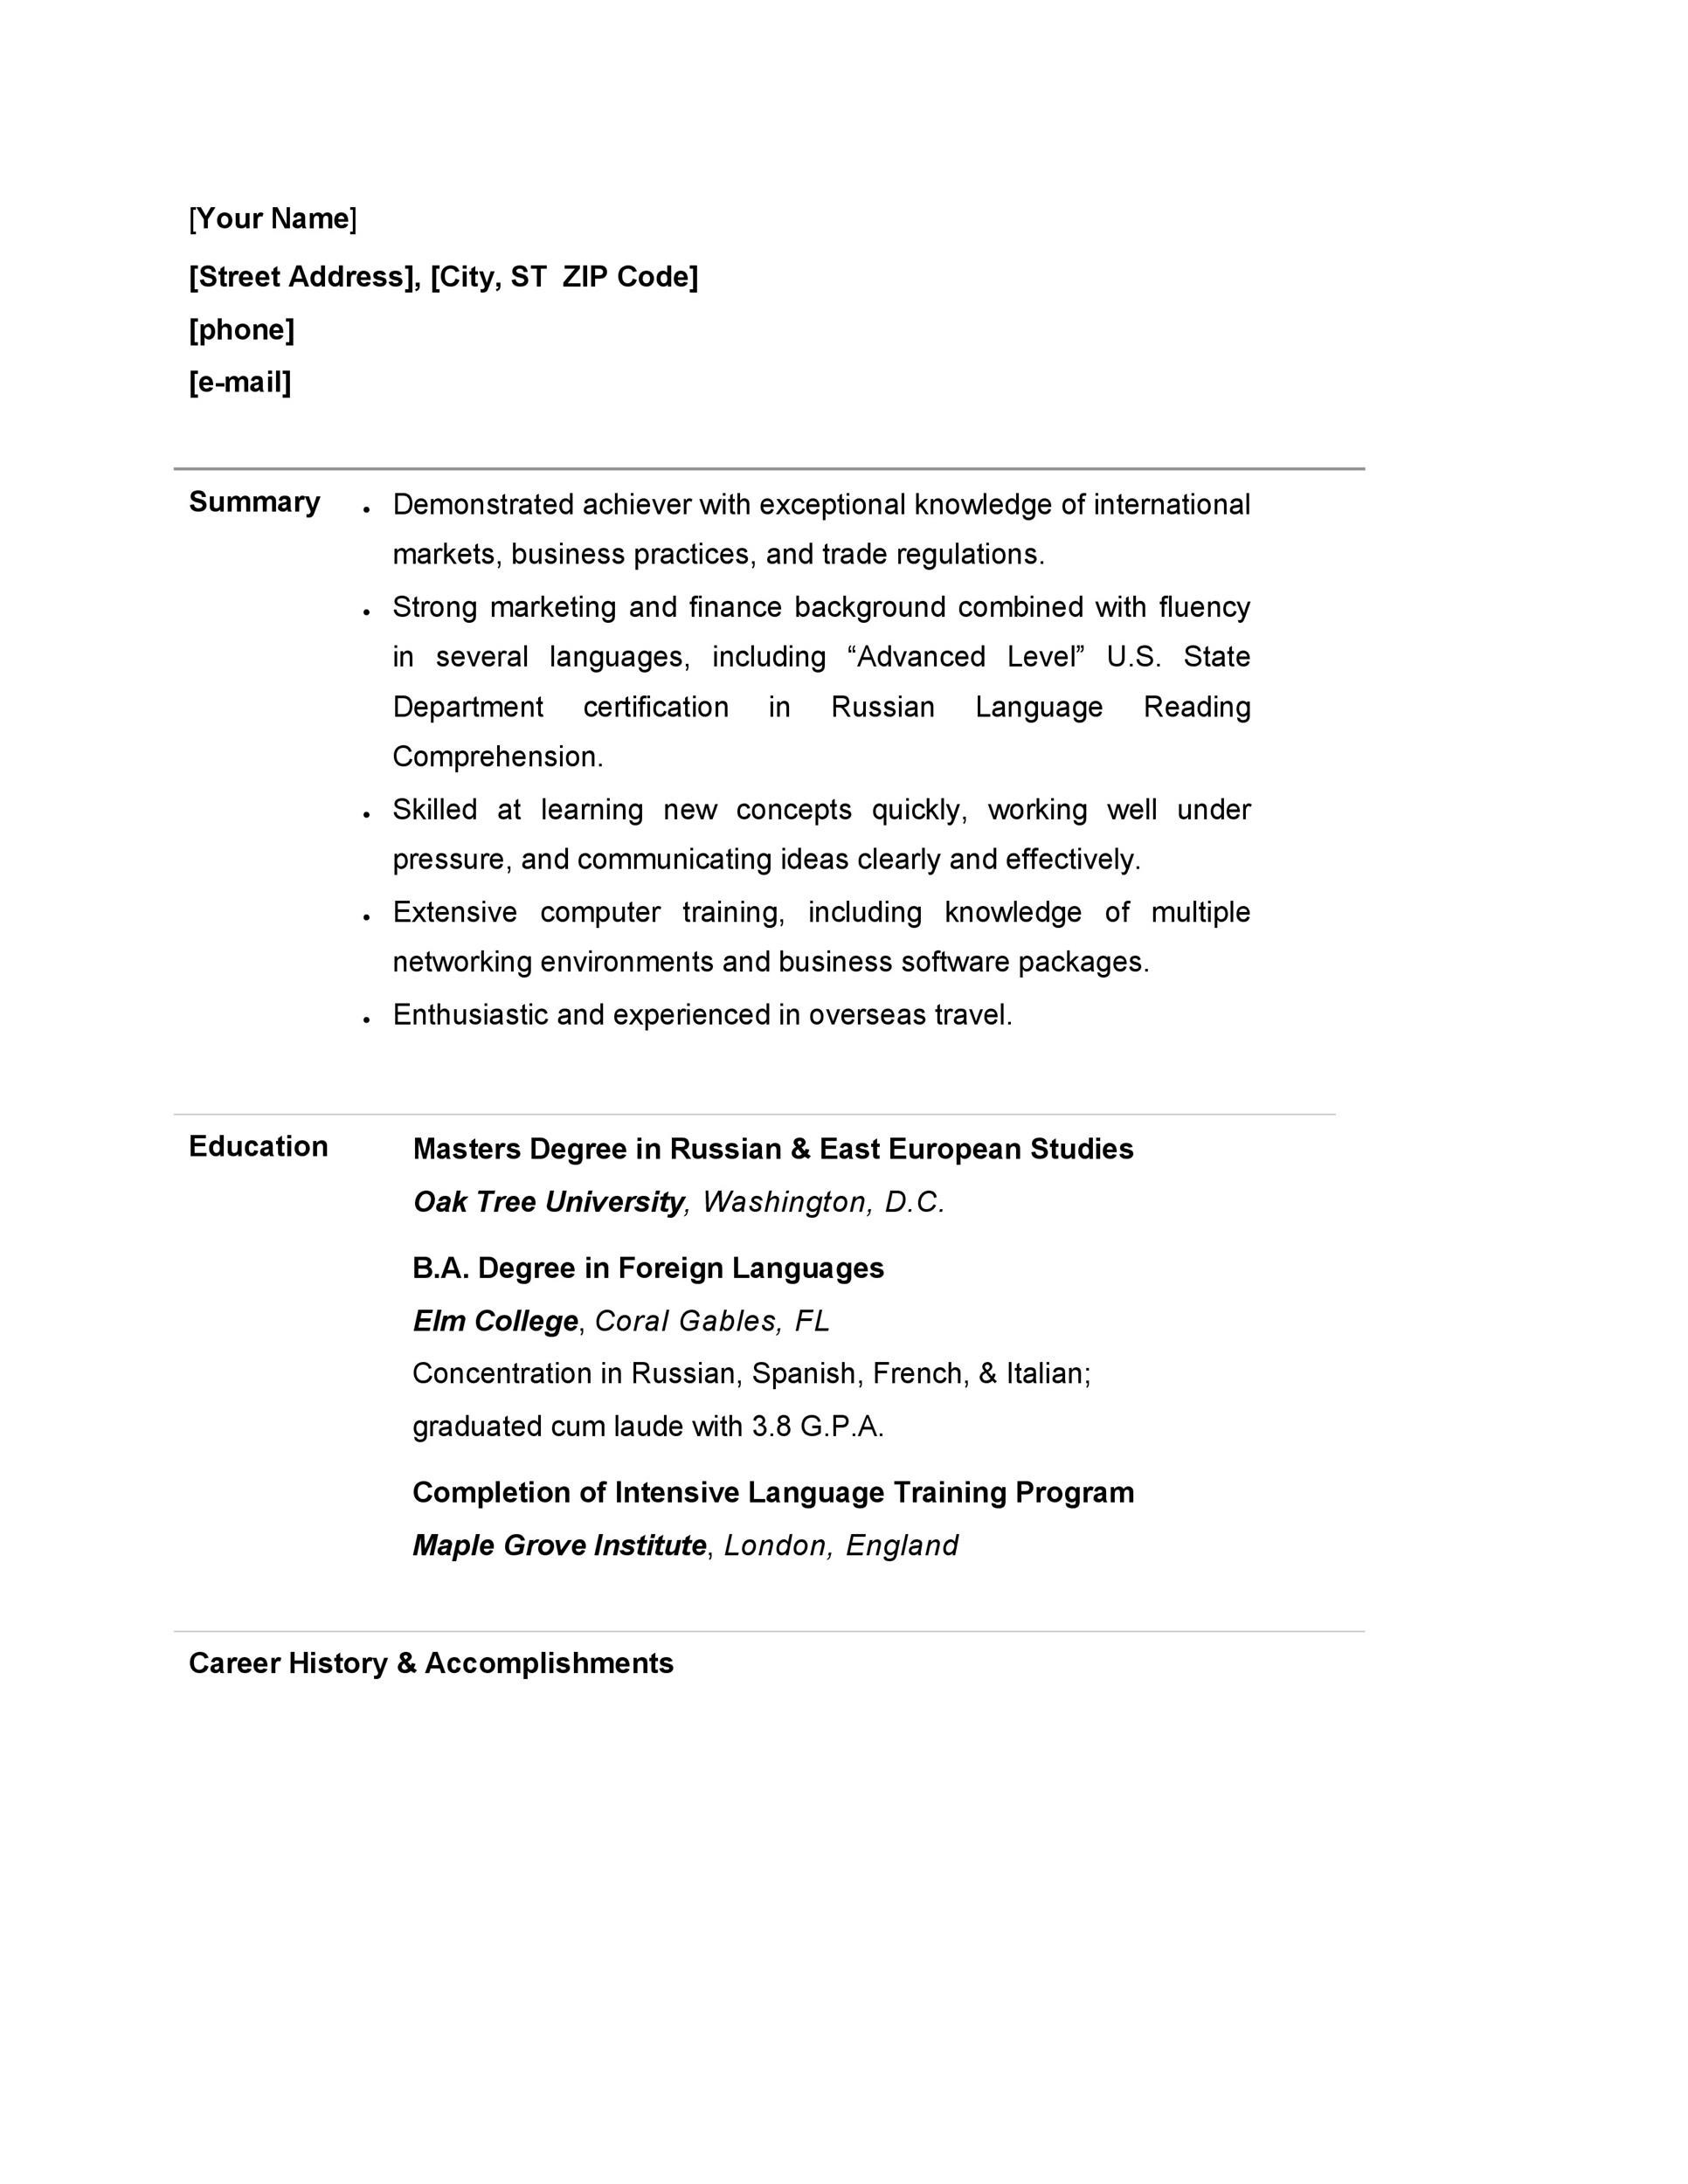 Free college resume template 44